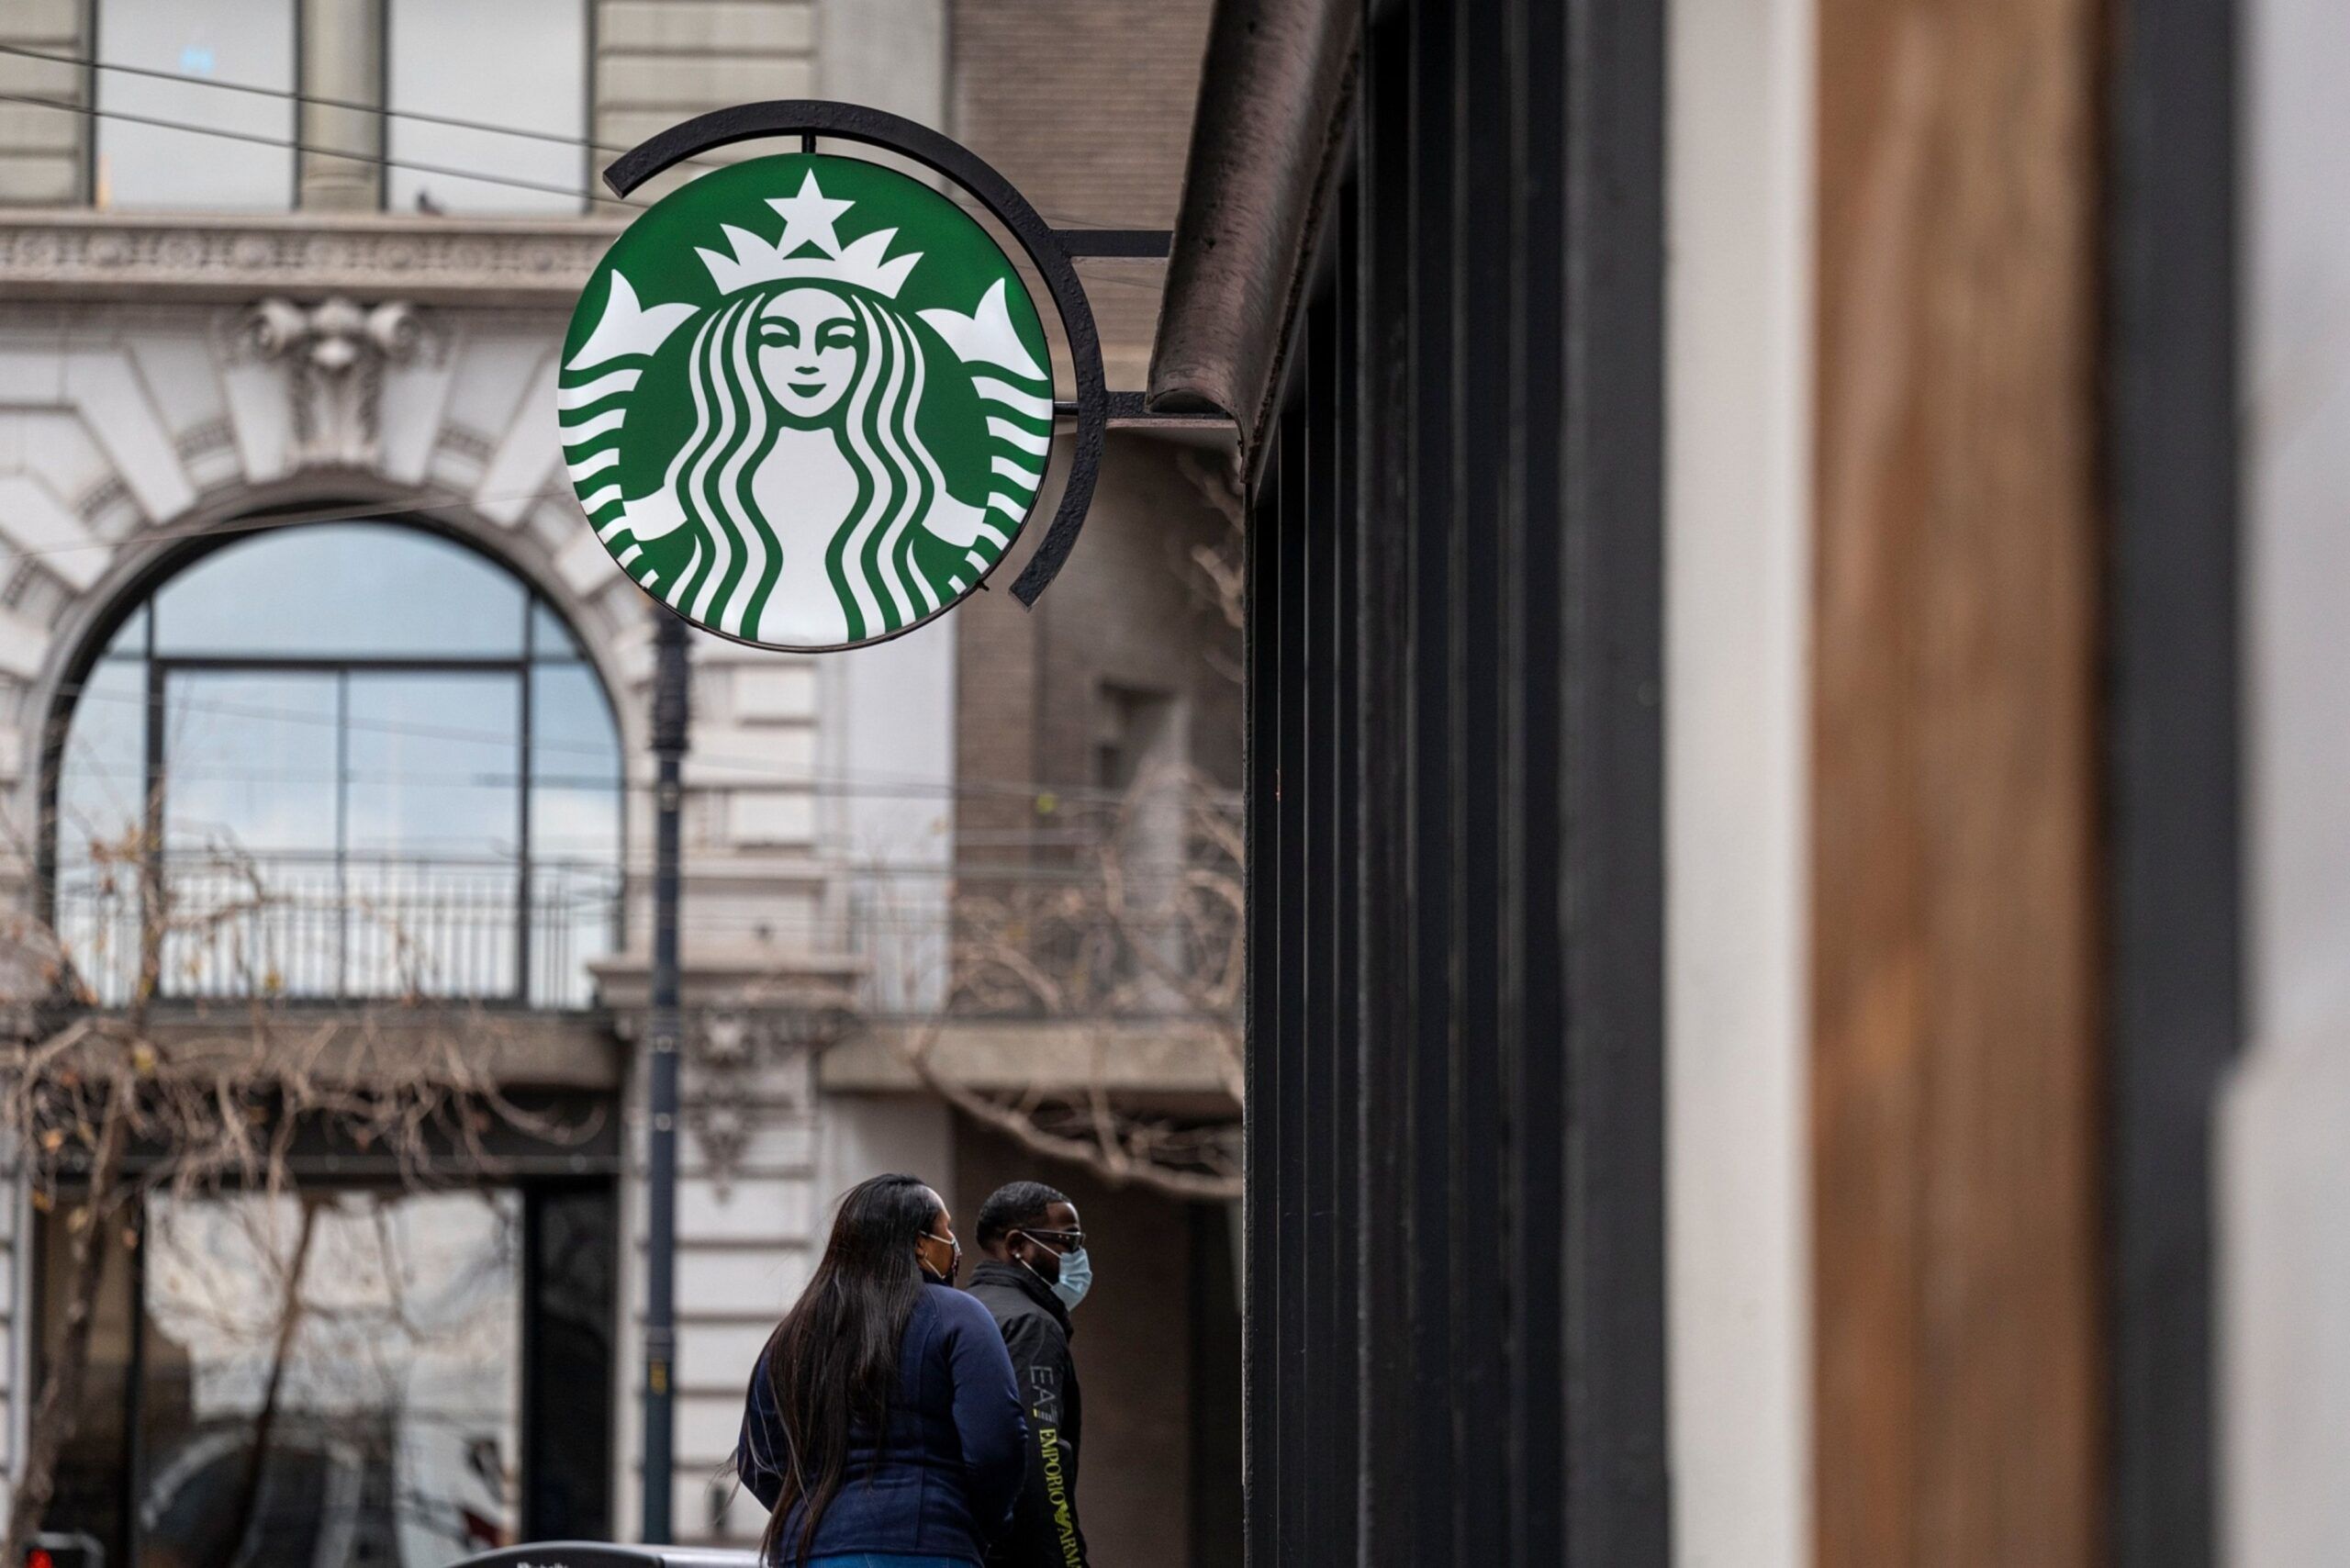 Pedestrians wearing protective masks walk past a Starbucks coffee shop in San Francisco, California, U.S., on Thursday, Jan. 21, 2021. Starbucks Corp. is expected to release earnings figures on January 26. Photographer: David Paul Morris/Bloomberg